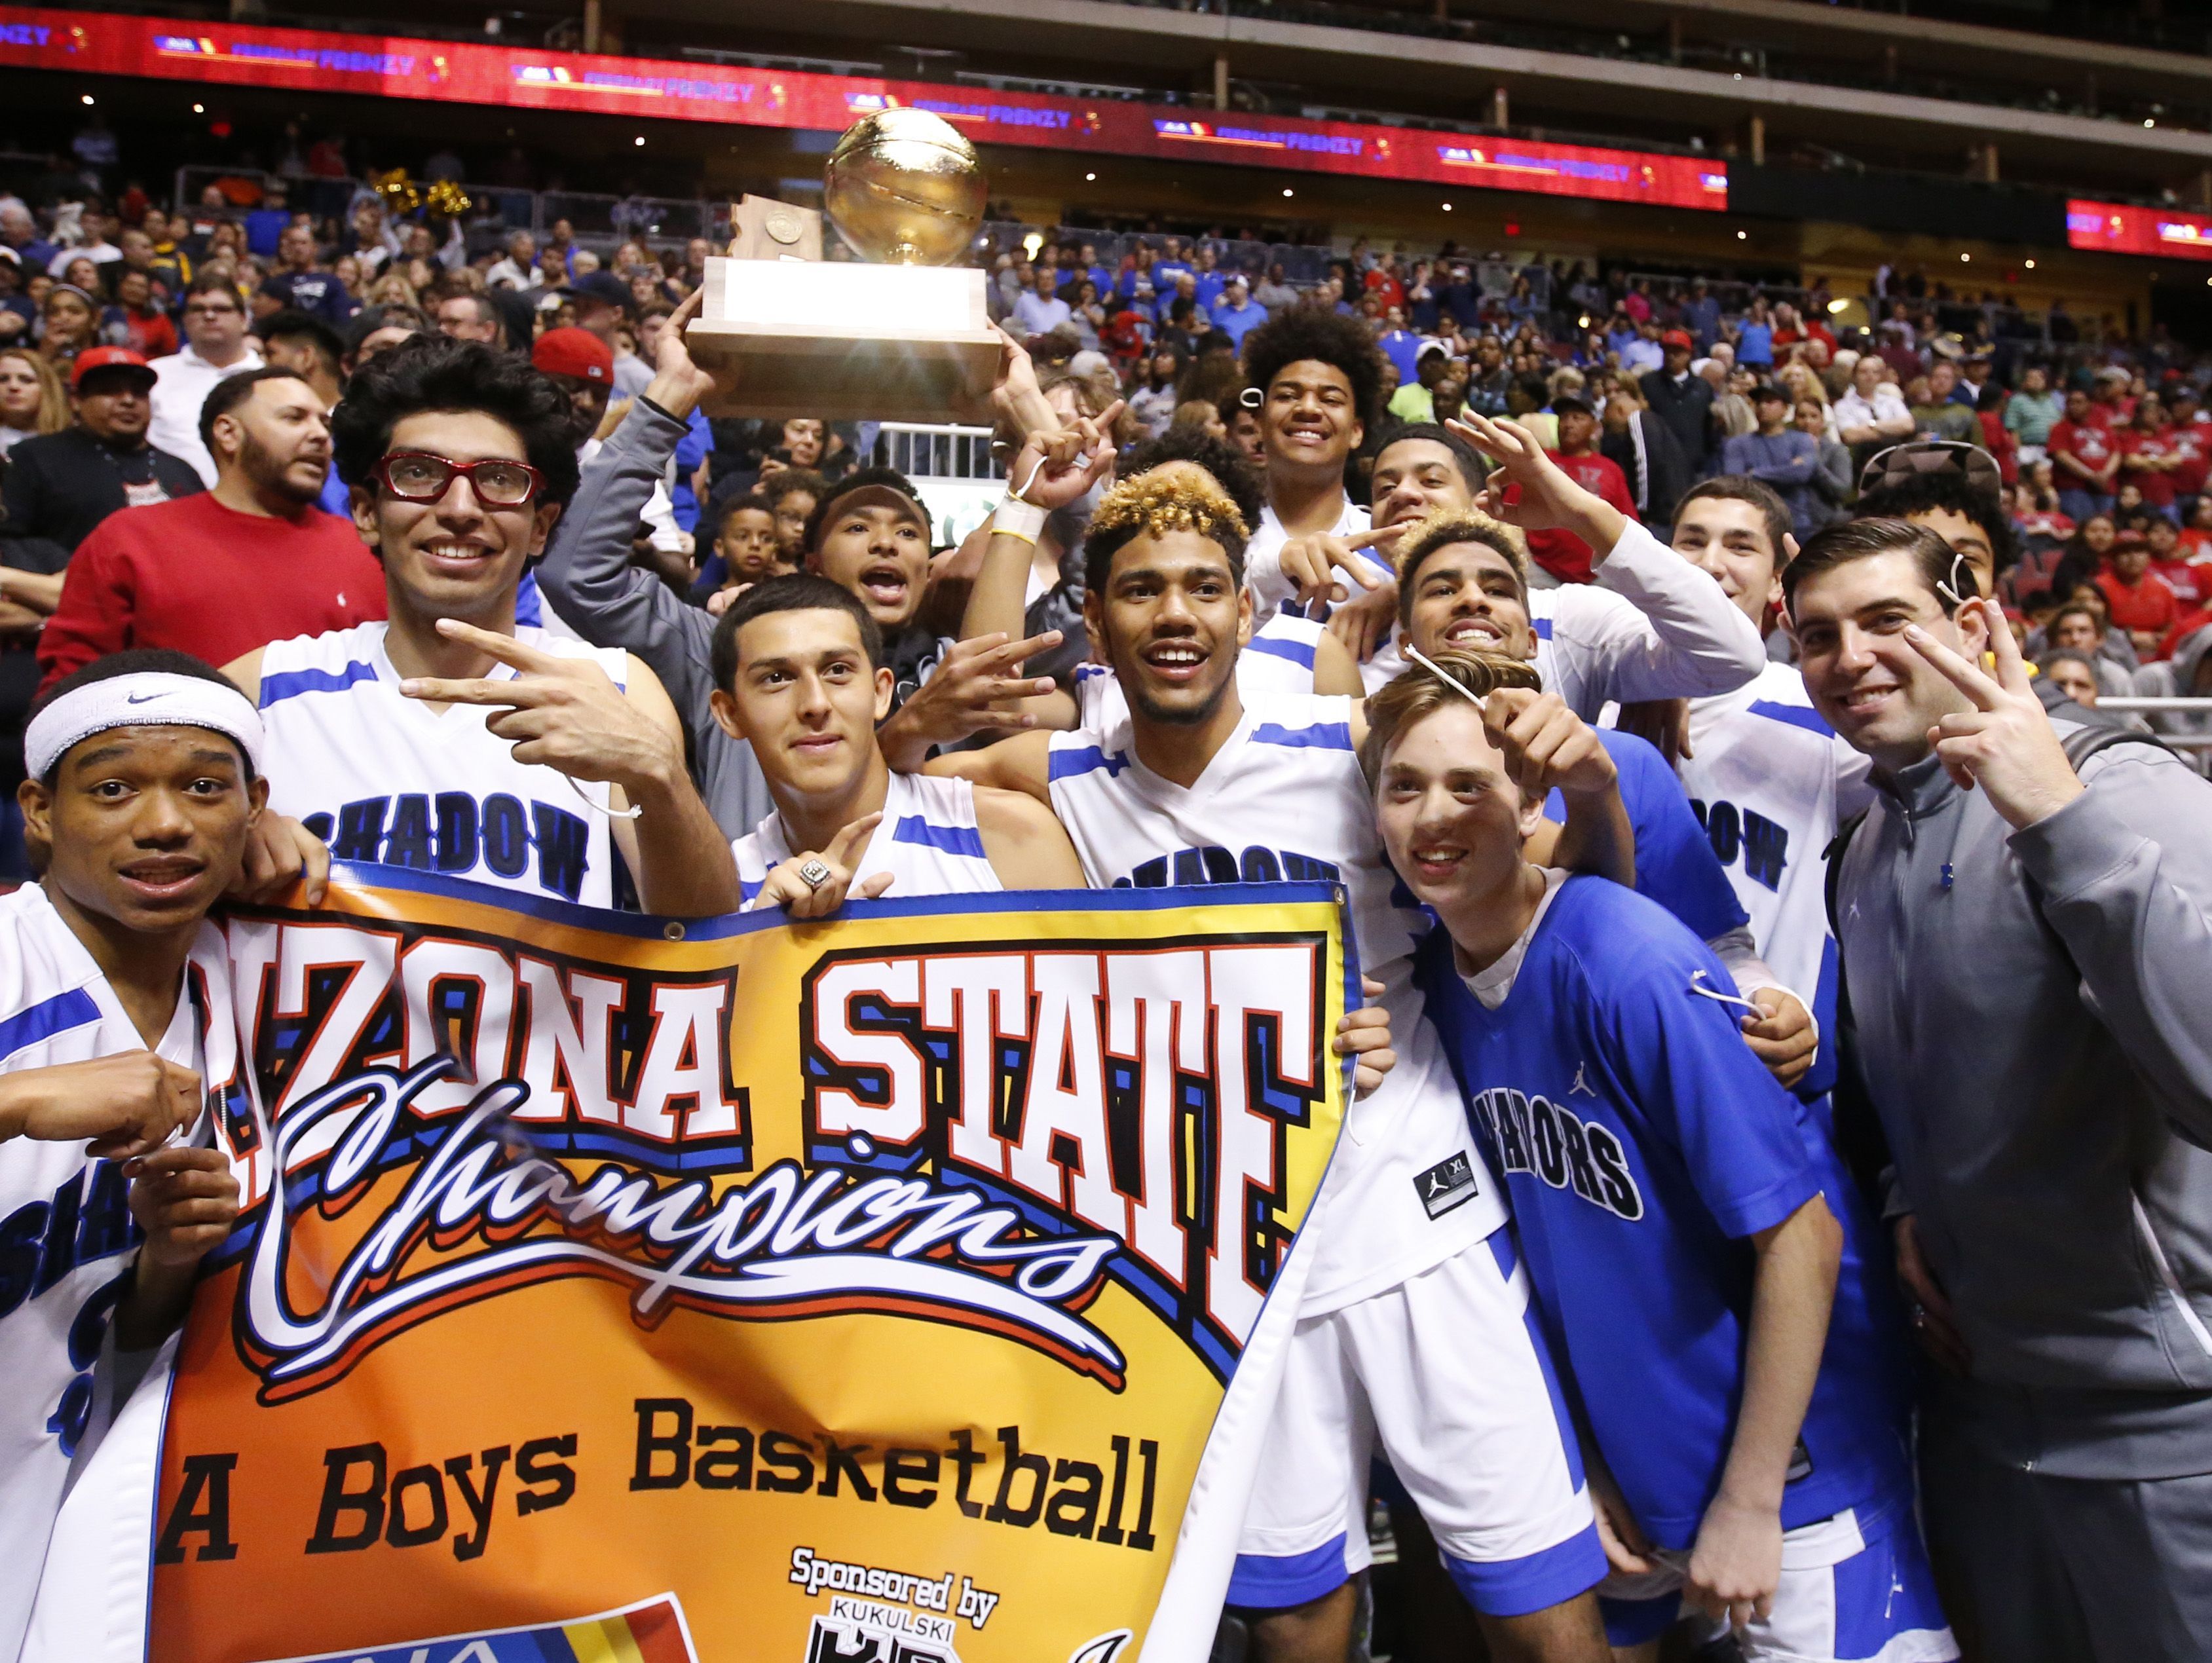 Shadow Mountain celebrates winning the high school boys basketball: 4A Conference state championship game against the Salpointe off court at Gila River Arena in Glendale on February 25, 2017. Shadow Mountain Jaelen House (2) was not allowed on the court after being ejected from the game.